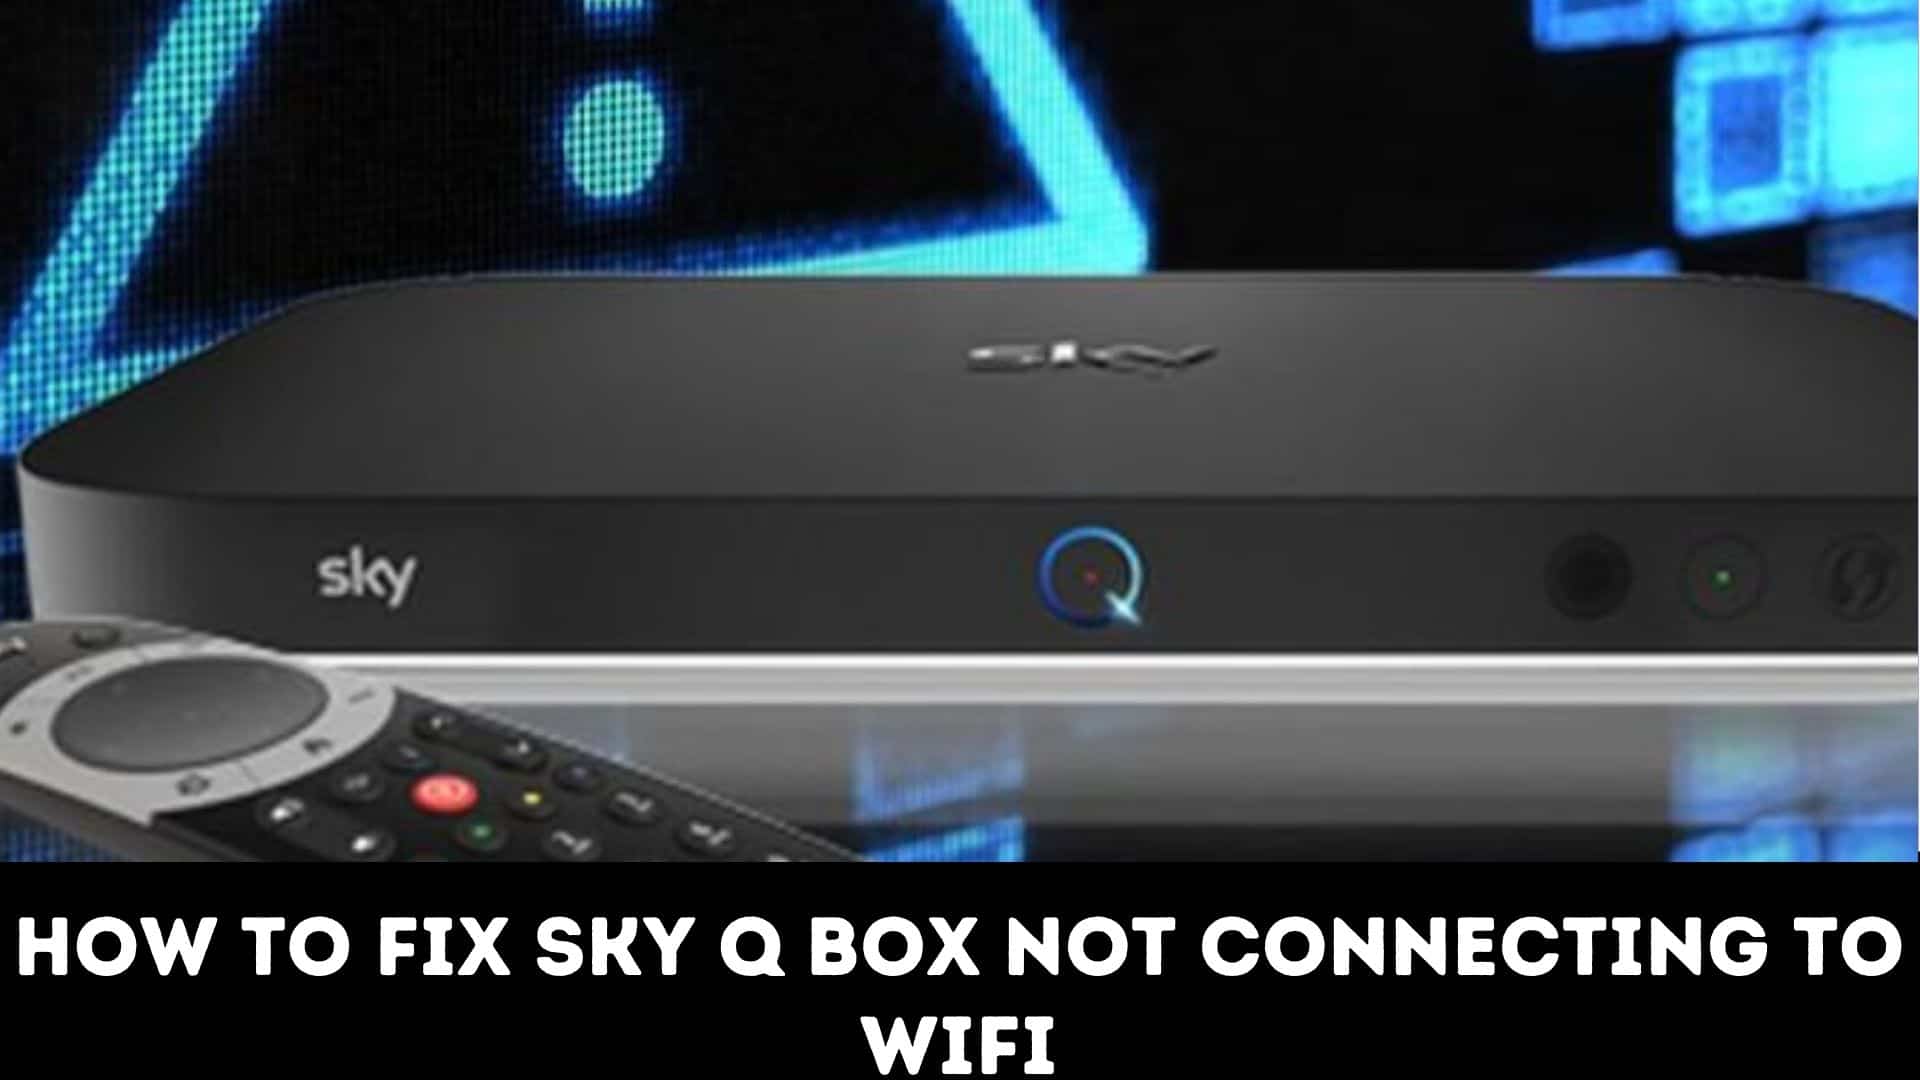 How to Fix Sky Q Box Not Connecting to WiFi